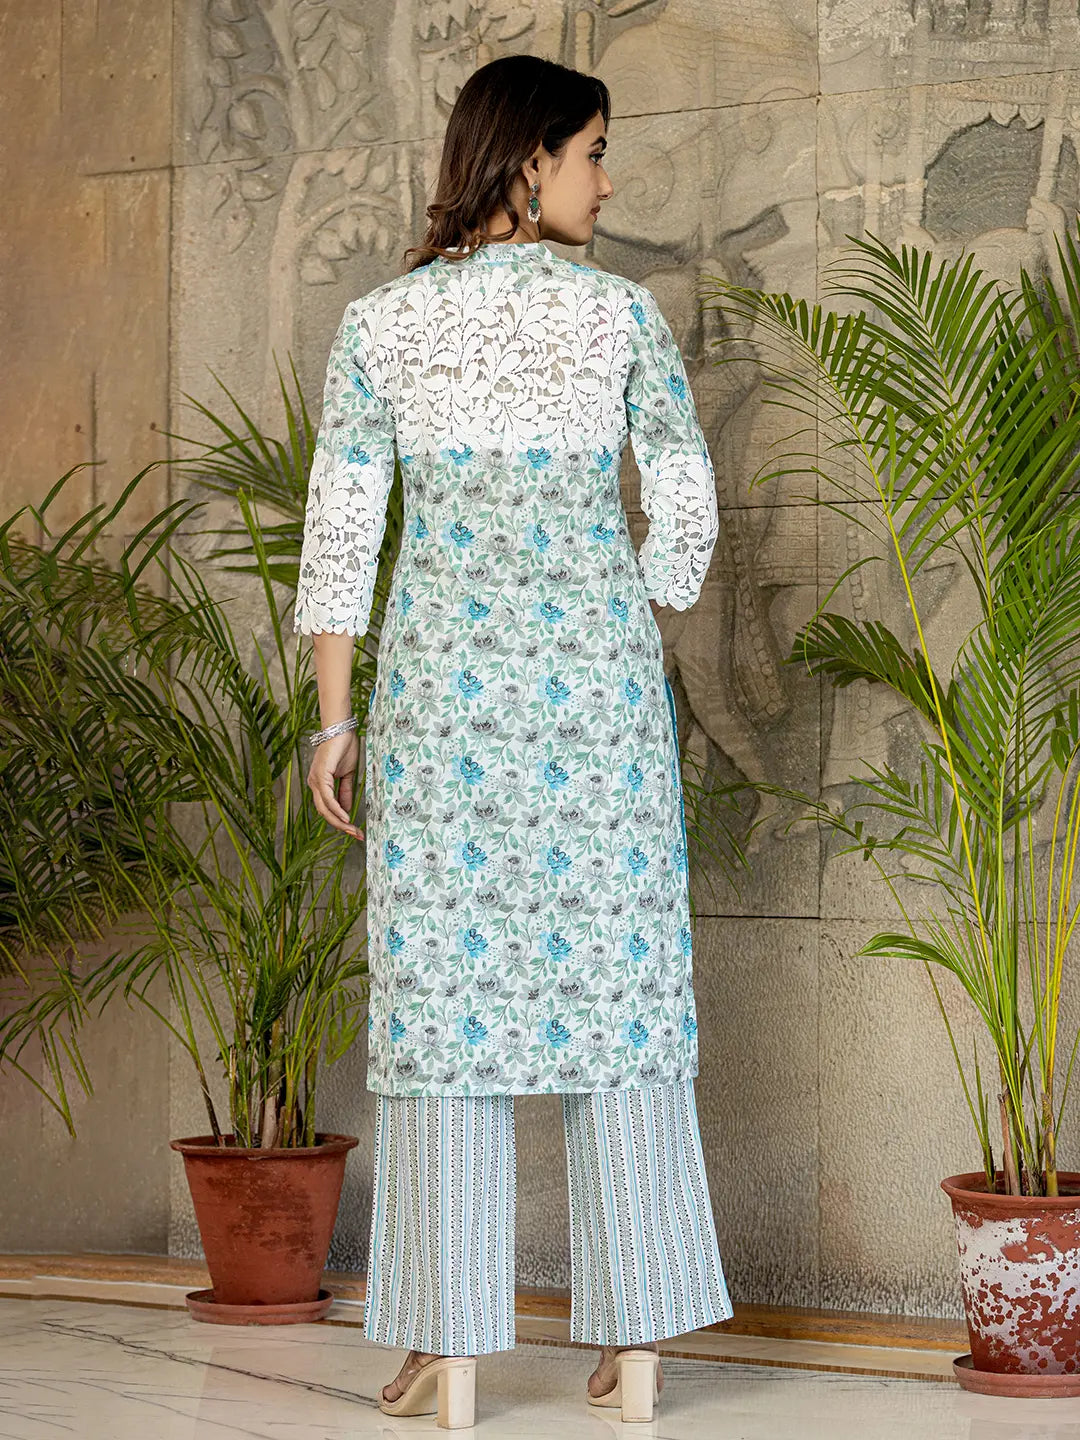 White And Sky Blue Floral Print Pakistani Style Kurta Trouser And Dupatta Set With Lace Work-Yufta Store-6886SKDSBM